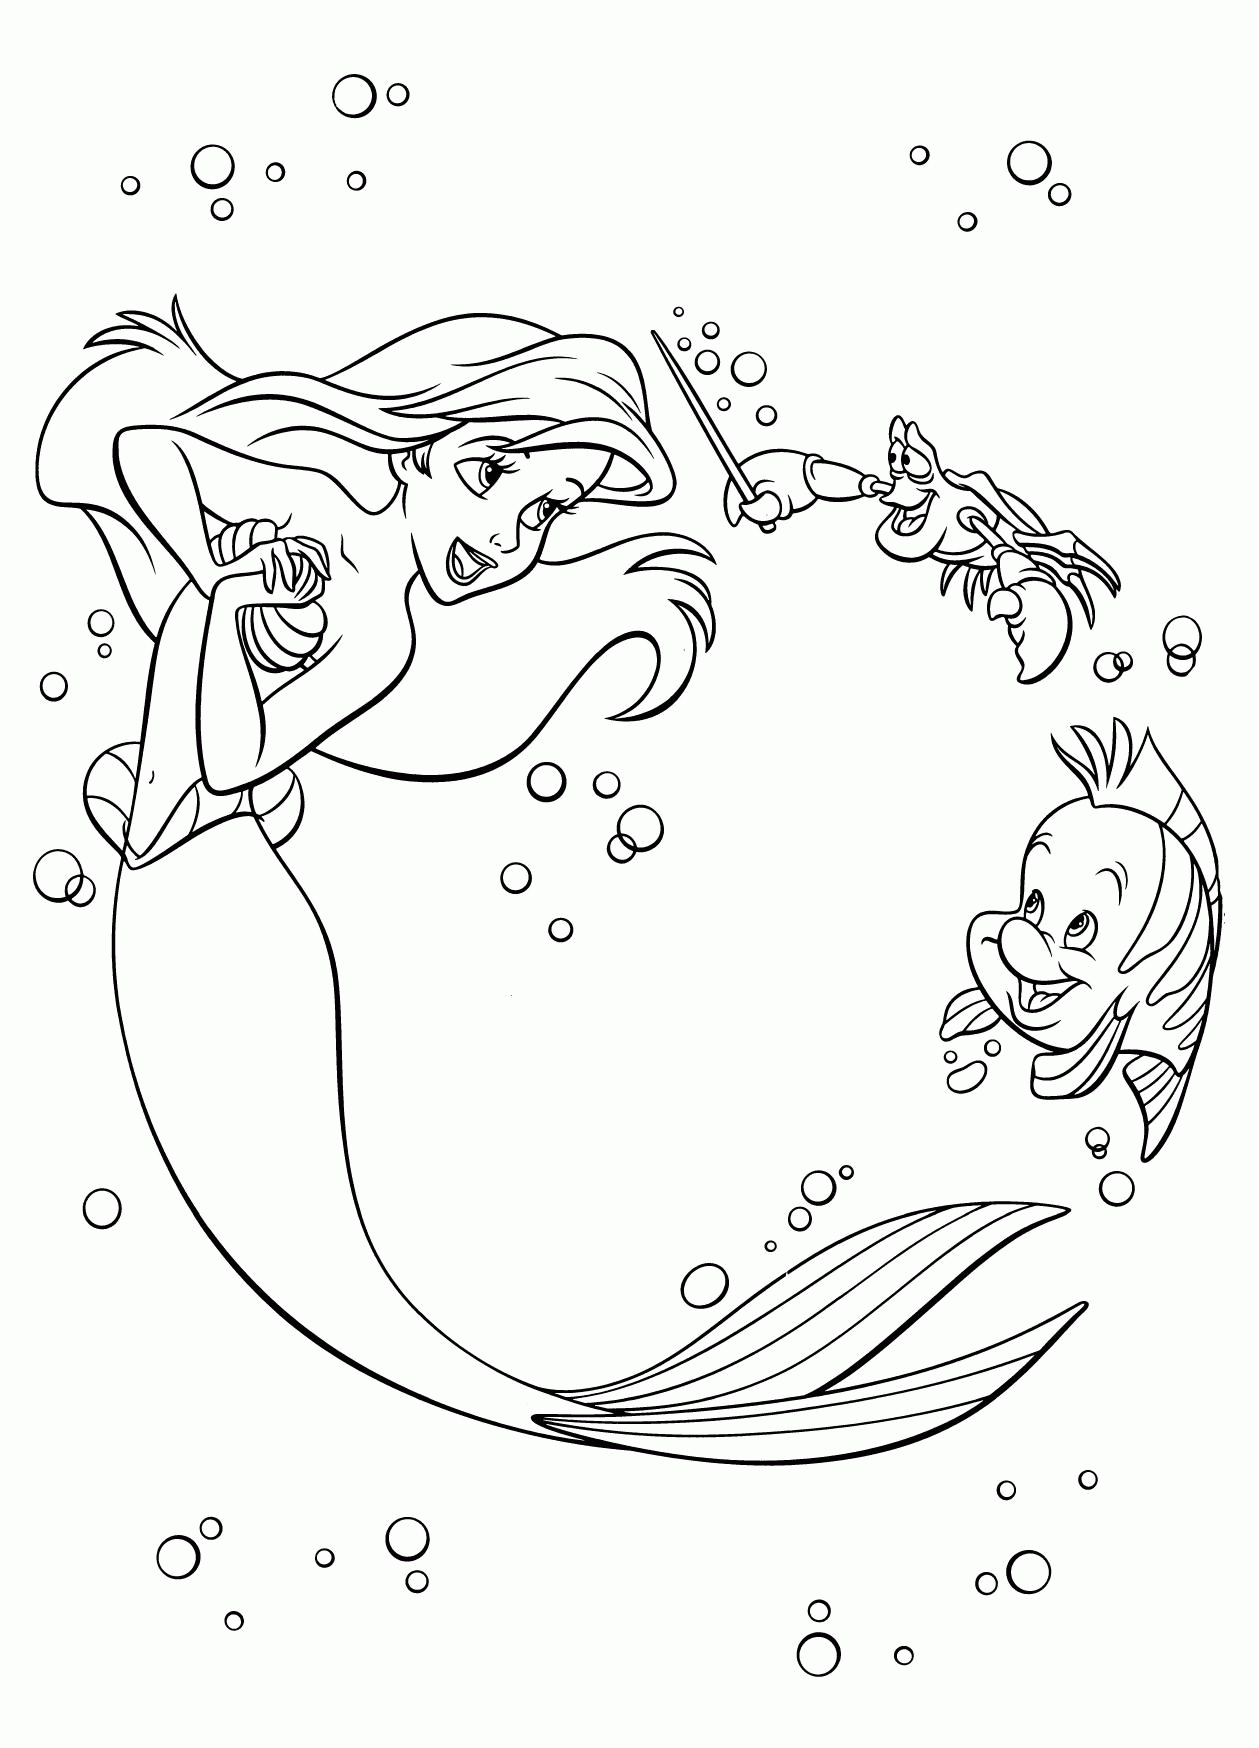 Pdf Coloring Pages For Kids Coloring Pages Pi5bm5gkt Free Princessg Pages Printable Disney